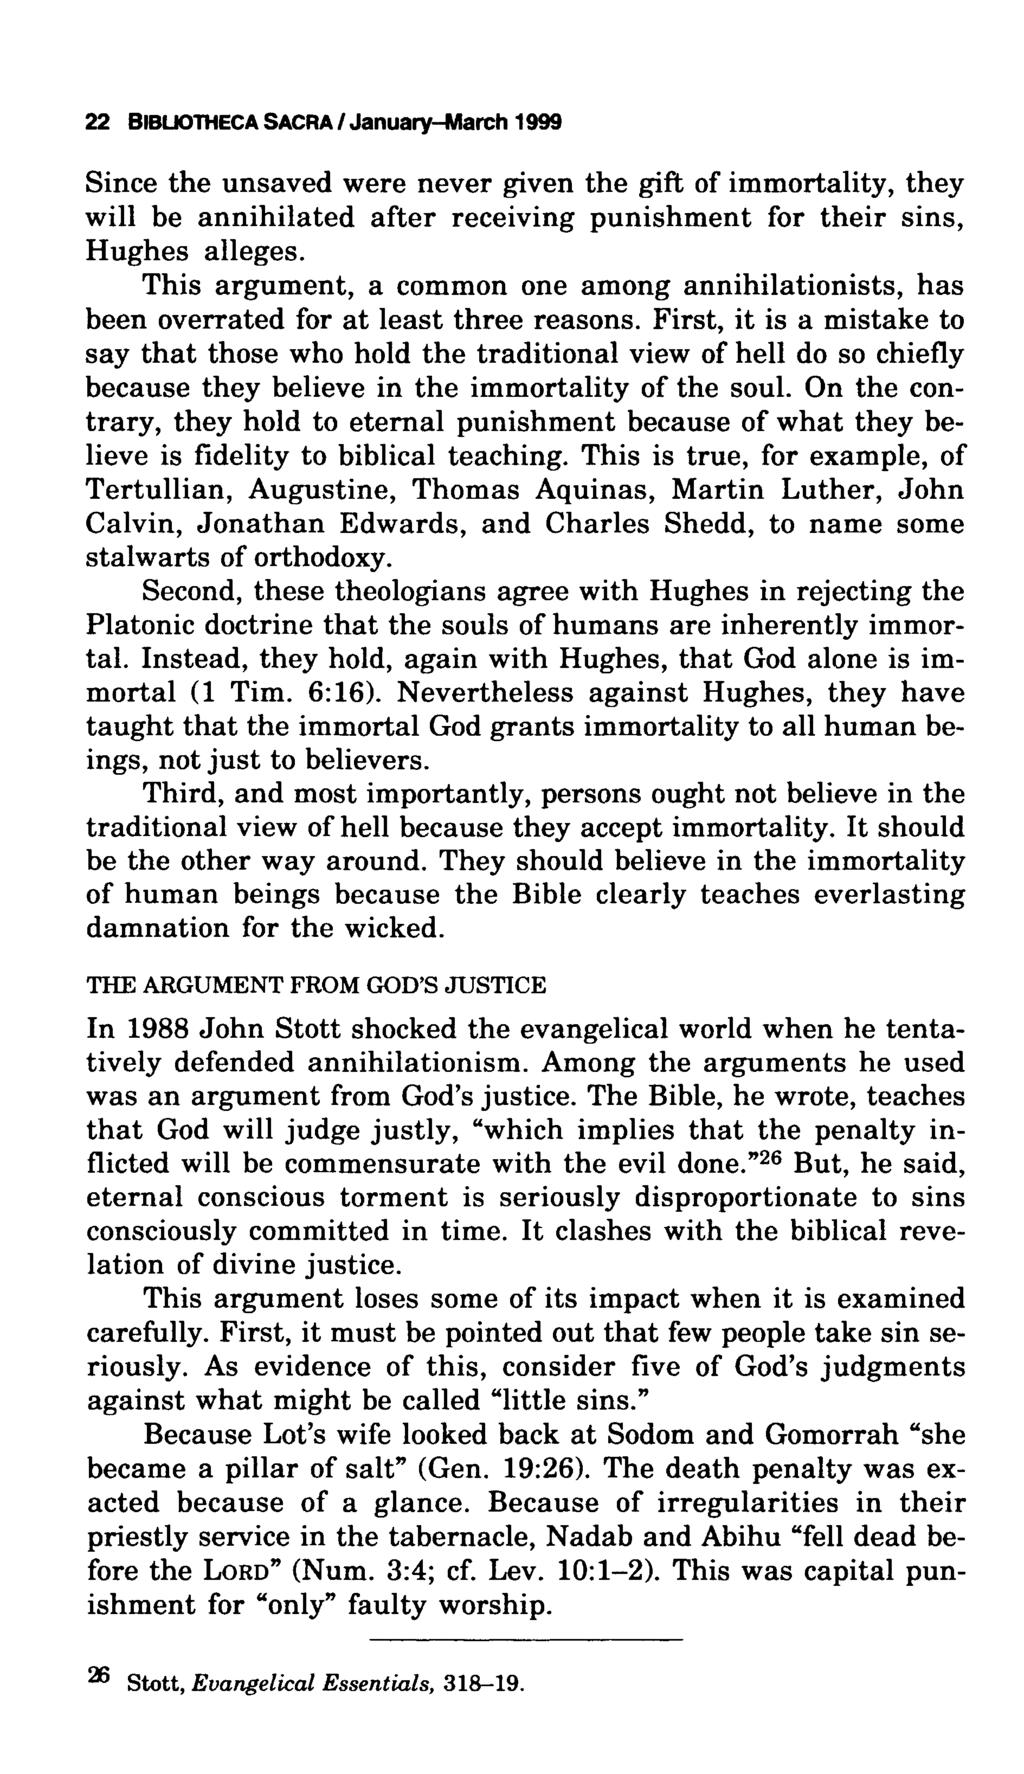 22 BlBUOTHECA SACRA / January-March 1999 Since the unsaved were never given the gift of immortality, they will be annihilated after receiving punishment for their sins, Hughes alleges.